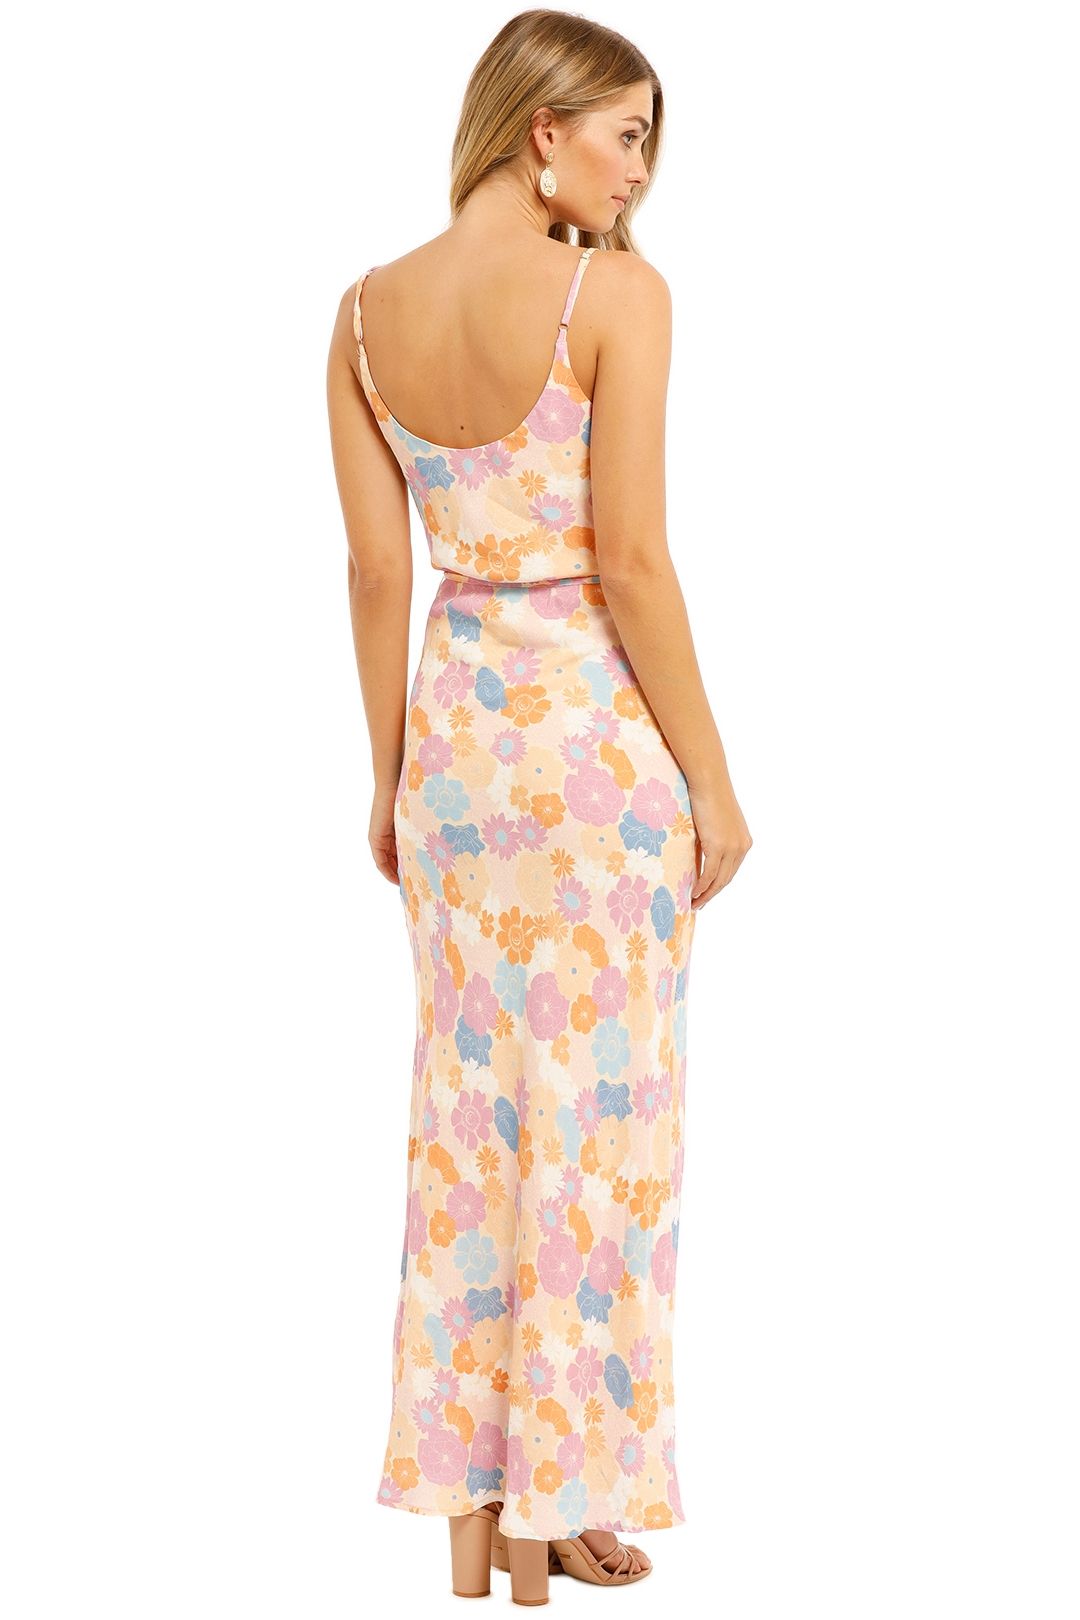 Charlie Holiday Daisy Midi Dress Floral Cove Scoop